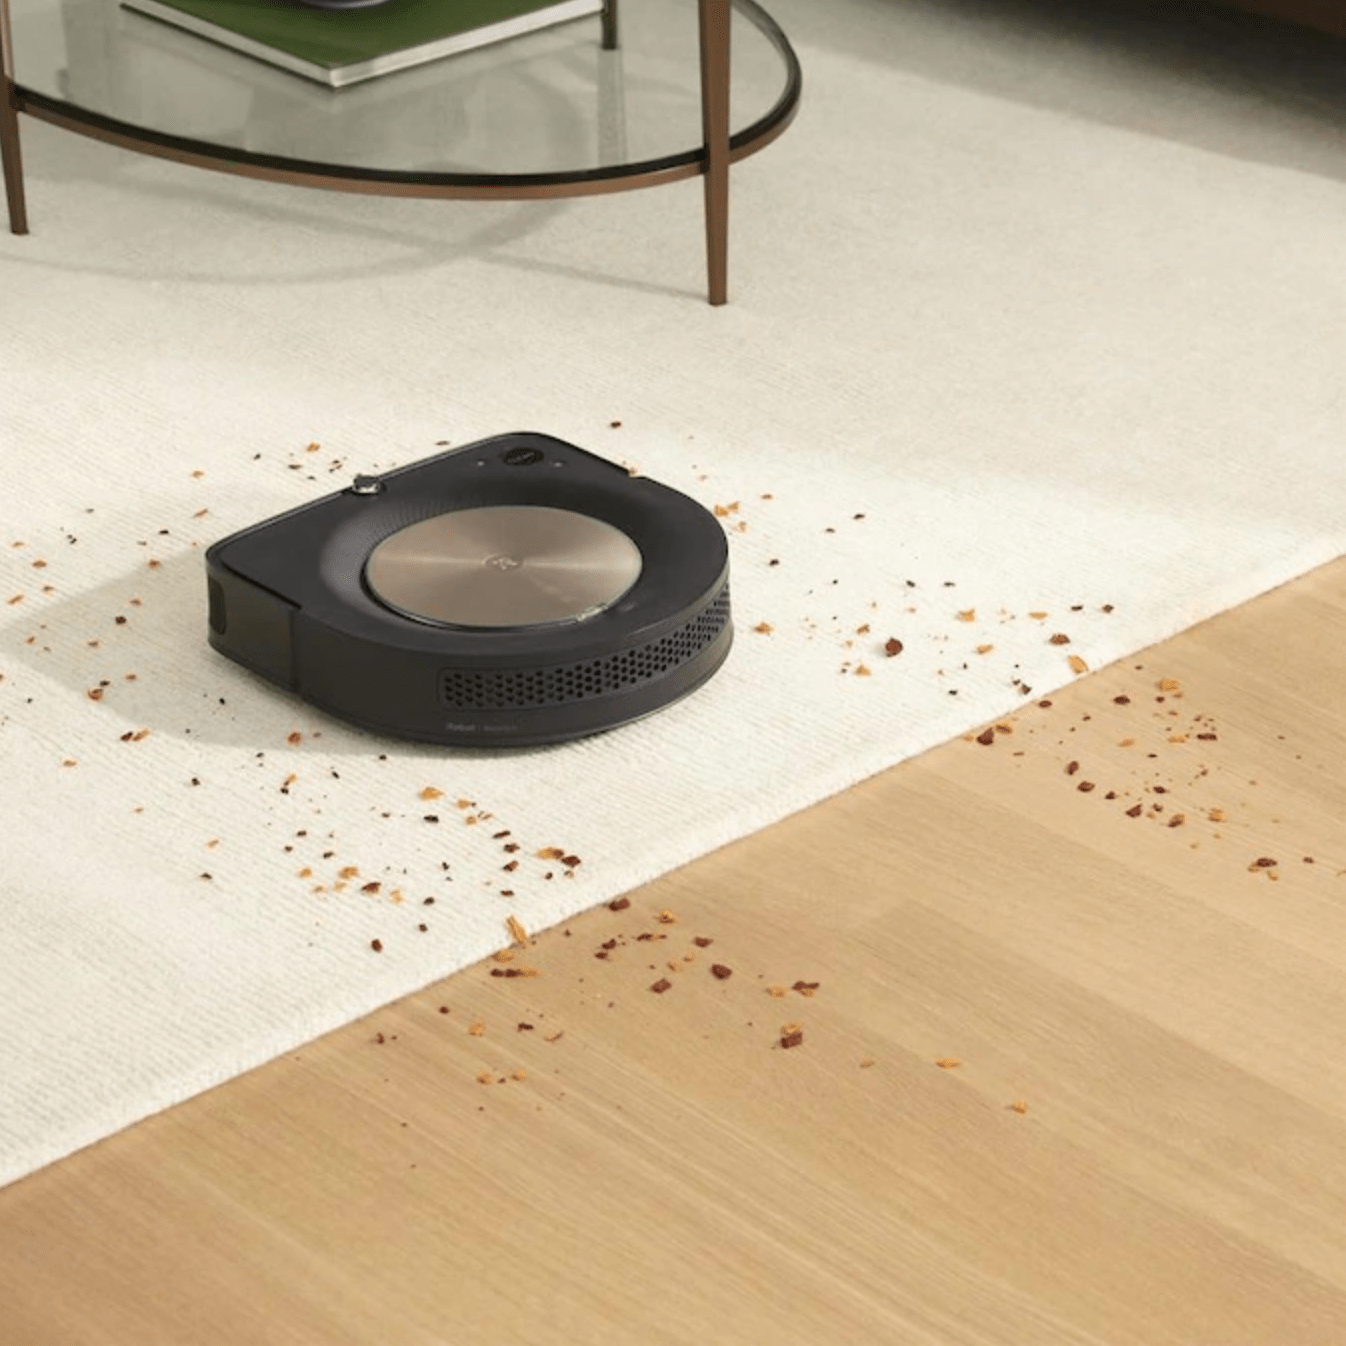 13 Robot Vacuums with the Best Customer Reviews